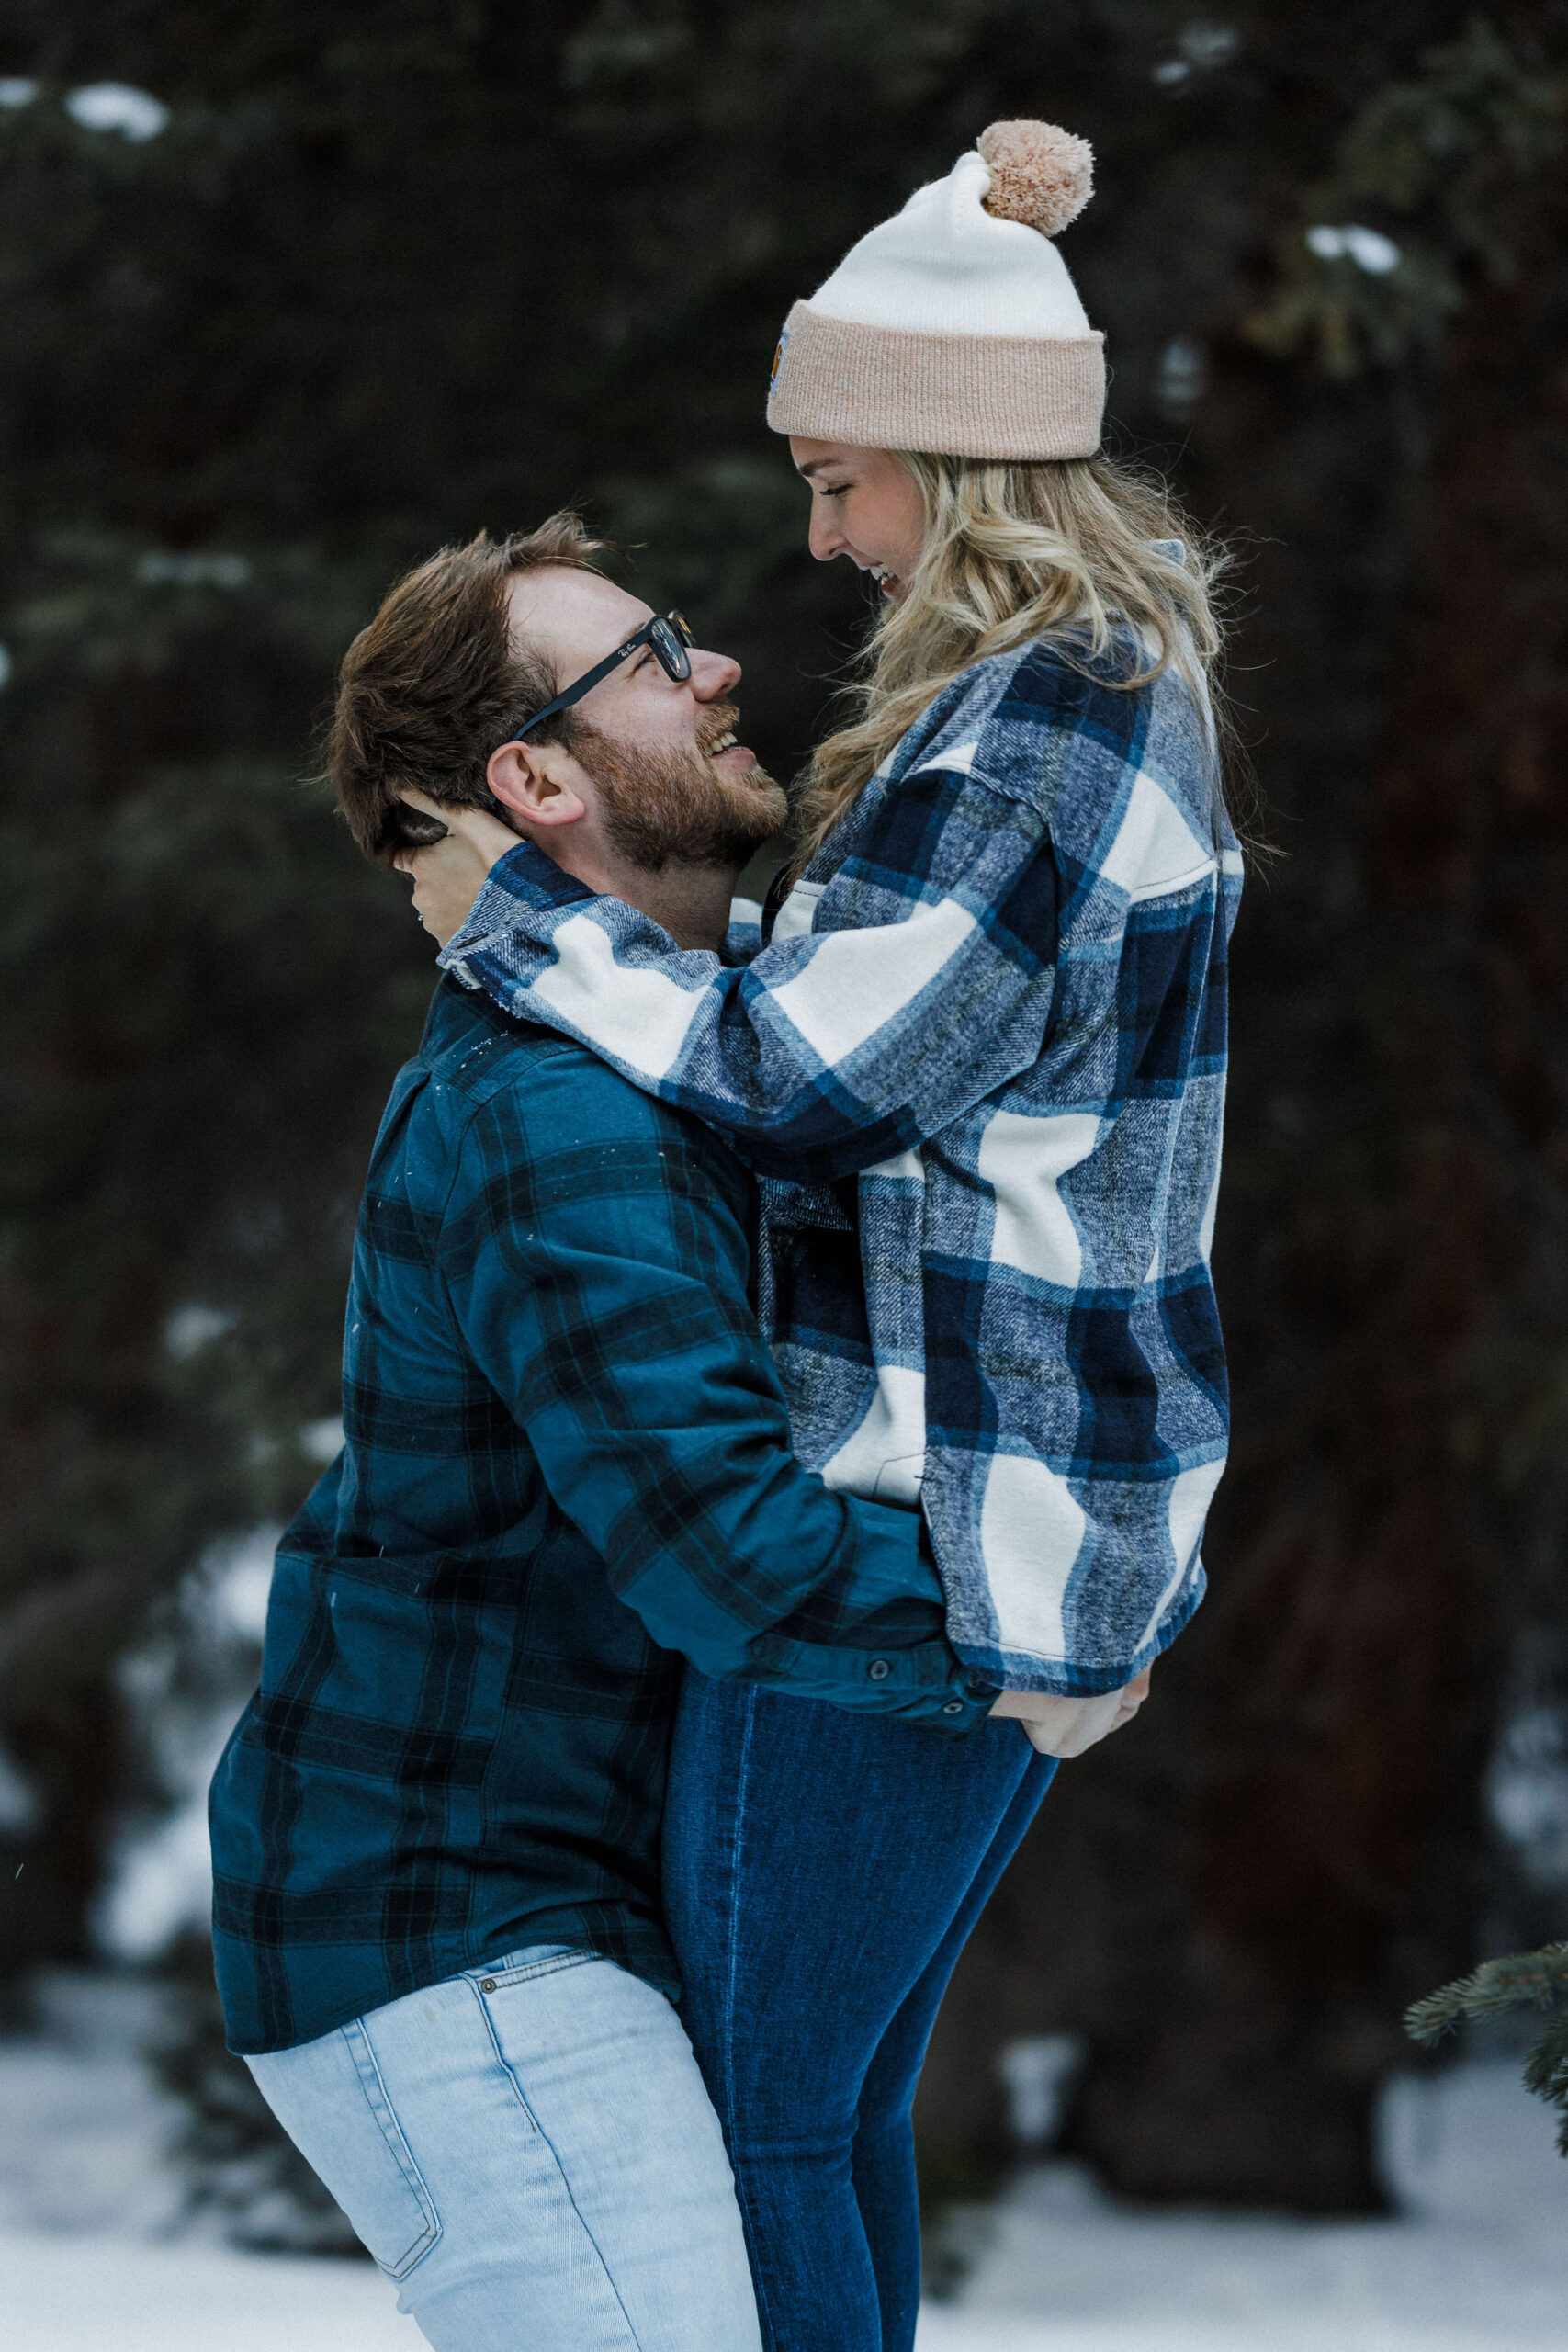 man picks up his fiance during winter engagement photo shoot.